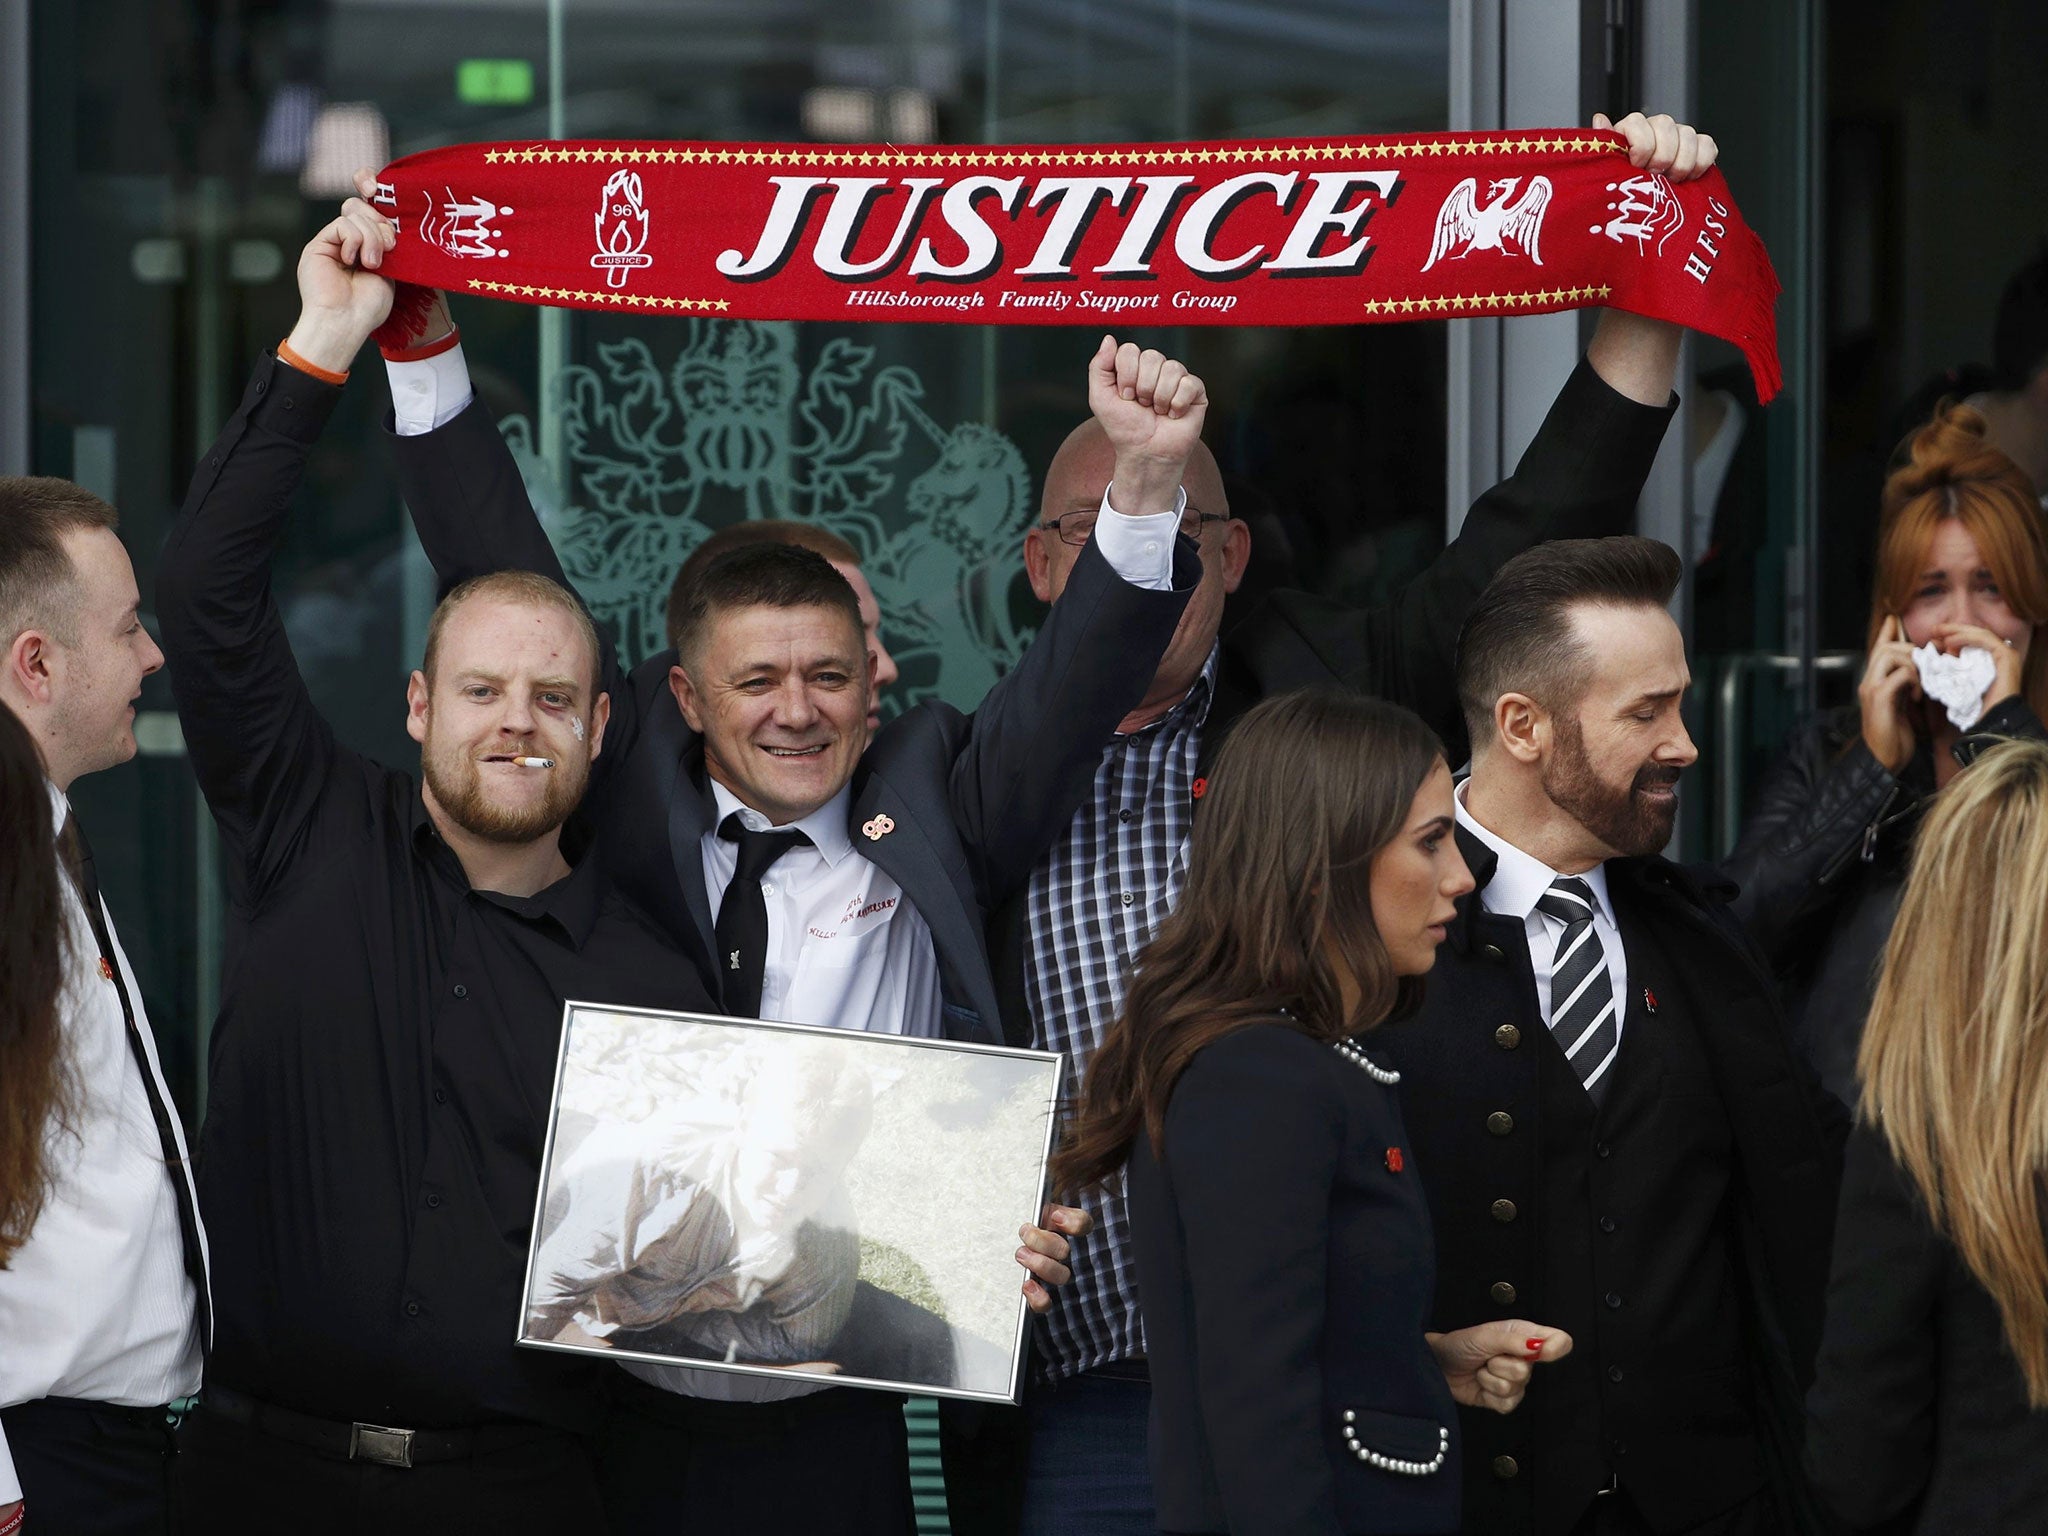 Relatives react after the jury delivered its verdict at the new inquests into the Hillsborough disaster, in Warrington, Britain April 26, 2016.